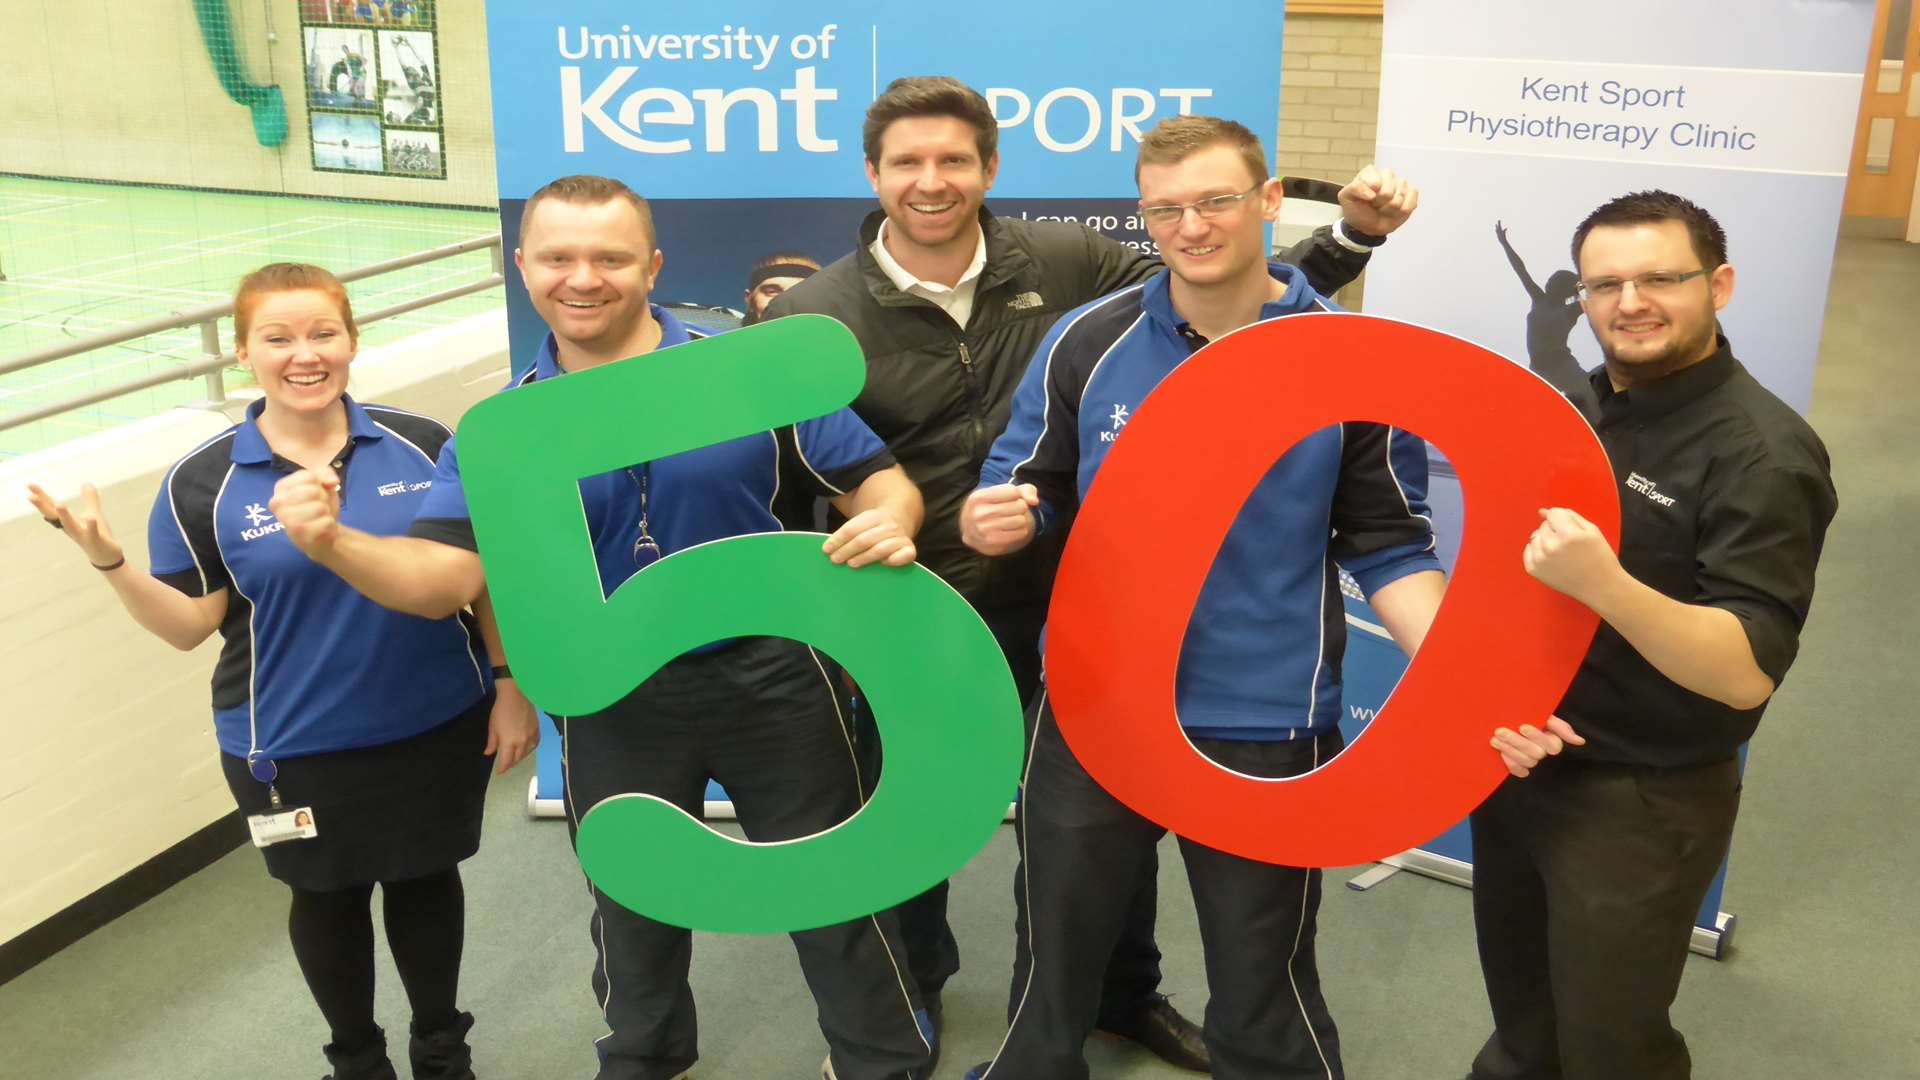 Mariah Young, Jarek Dzikowicz, Ben Trott, Chris Garton and Nick Sandland-Smith of UKC Sport celebrate the university's 50th anniversary by urging 50 teams to take part in the Canterbury Big Quiz on Friday, April 24.